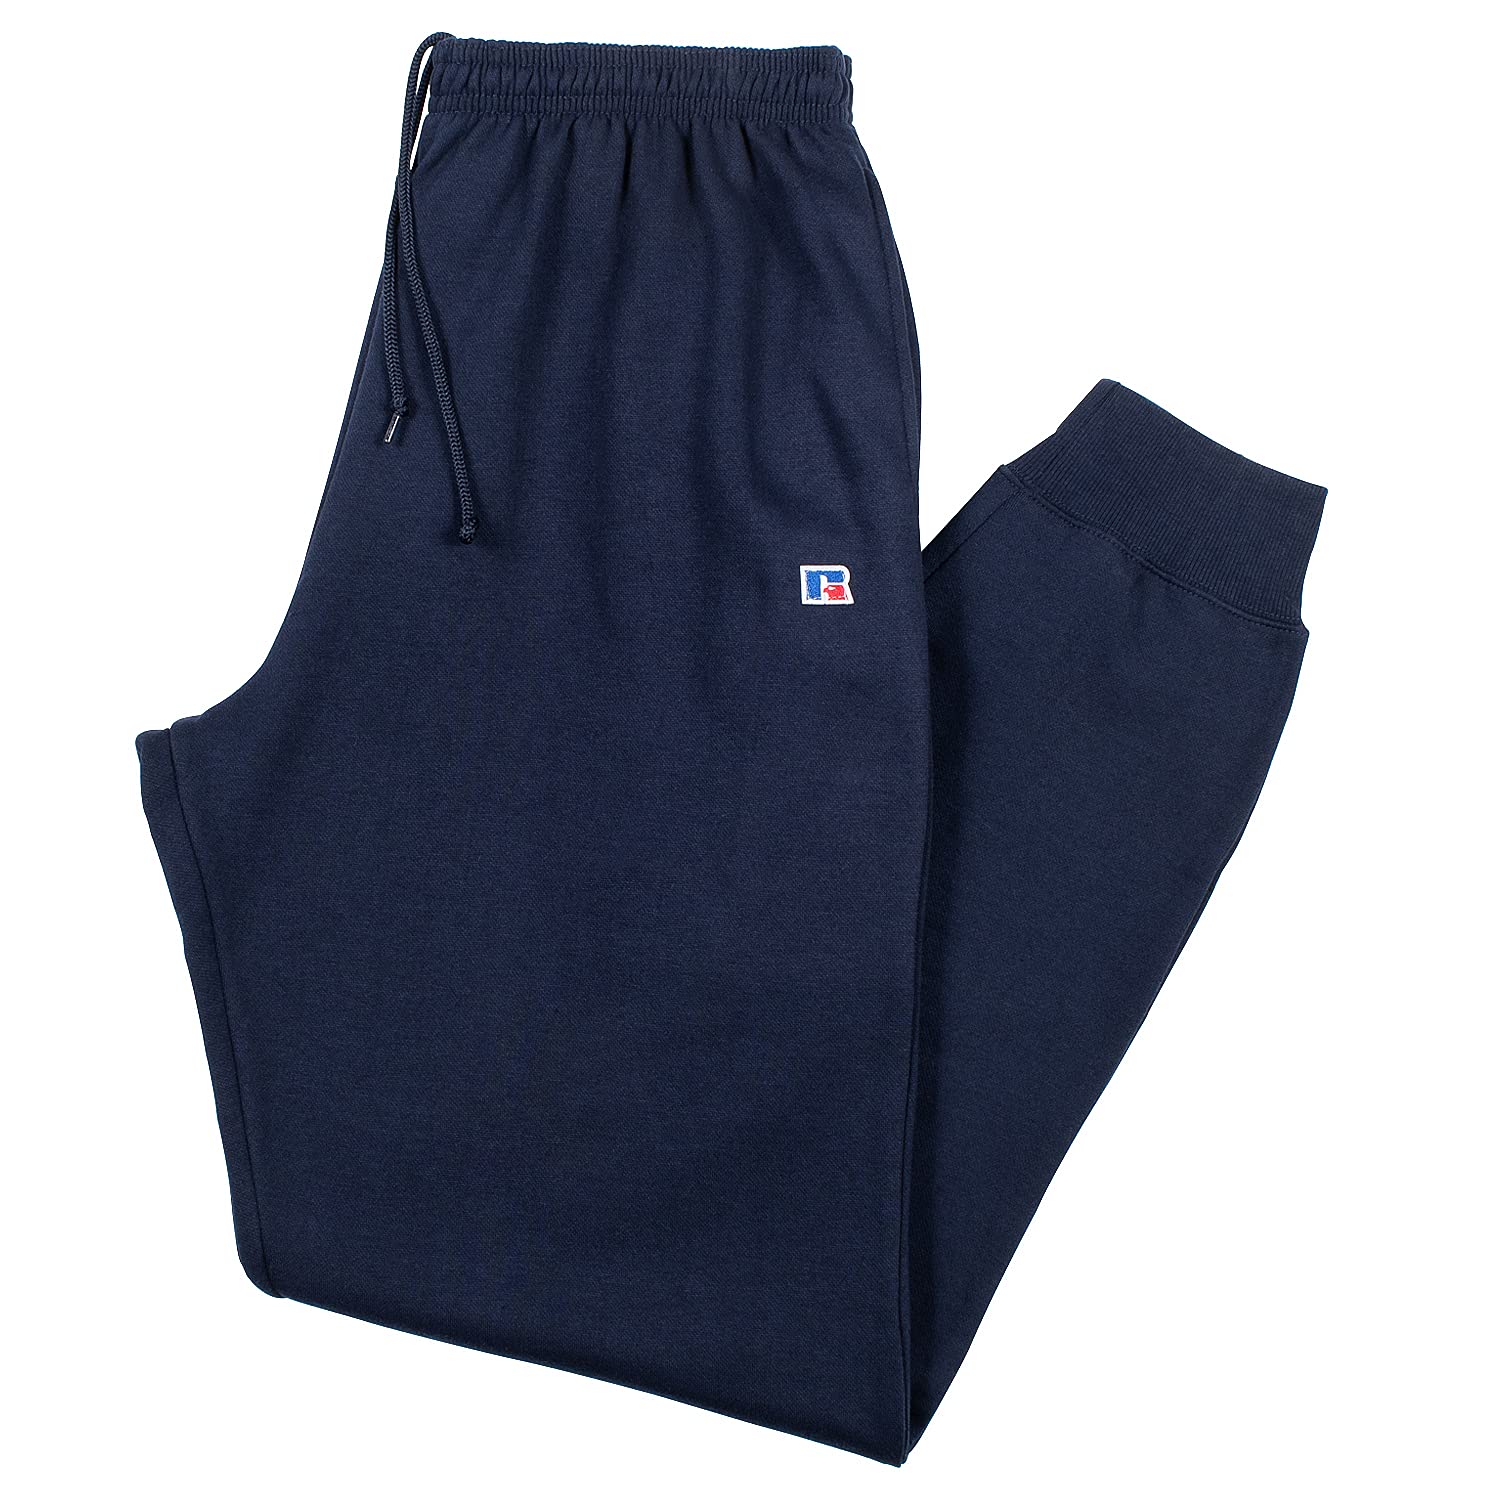 Russell Athletic Big and Tall Jersey Pants for Men – Open Bottom